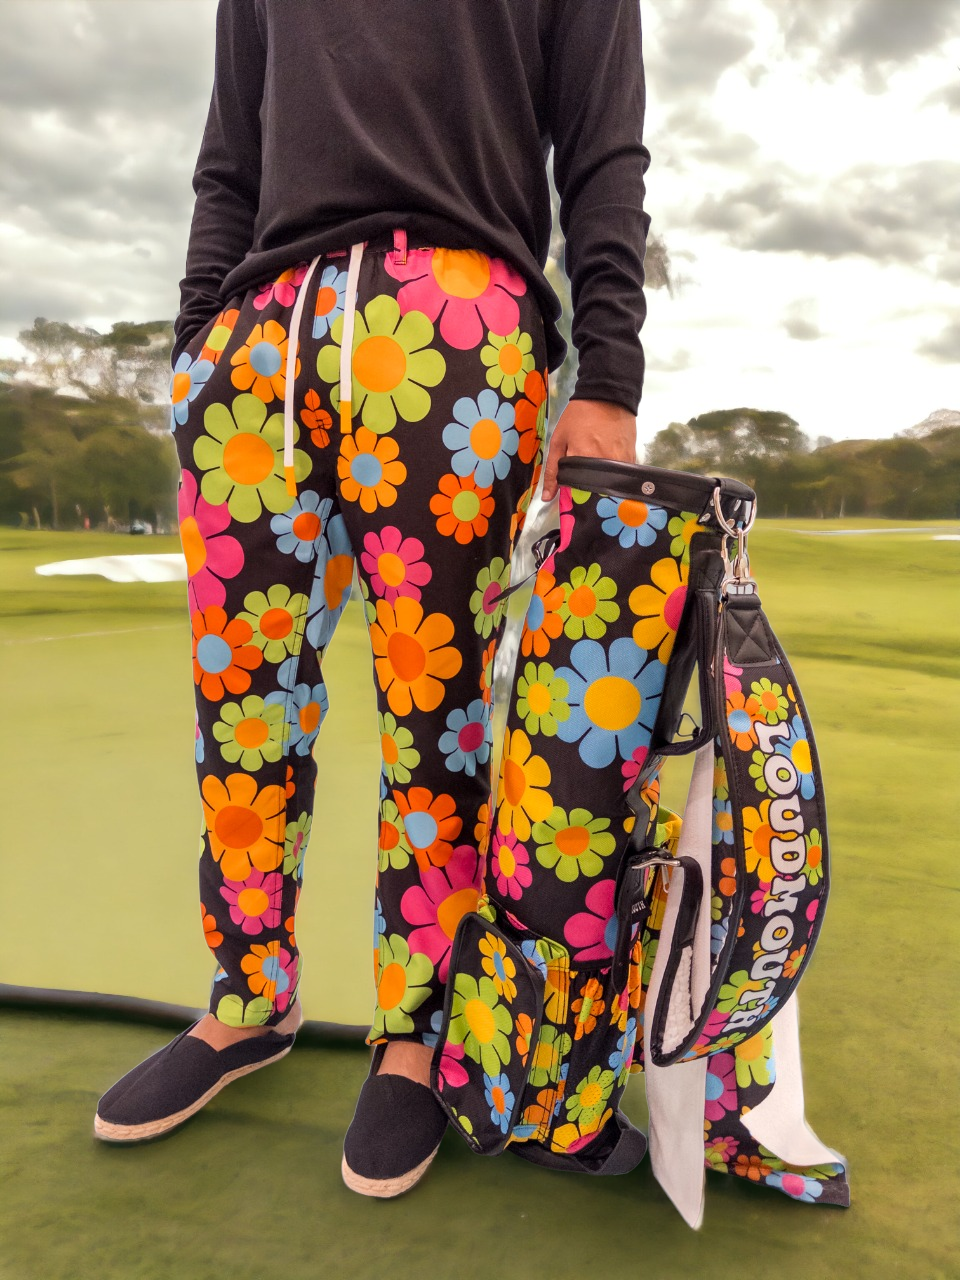 John Daly's Return Comes With a Fashion Statement - The New York Times